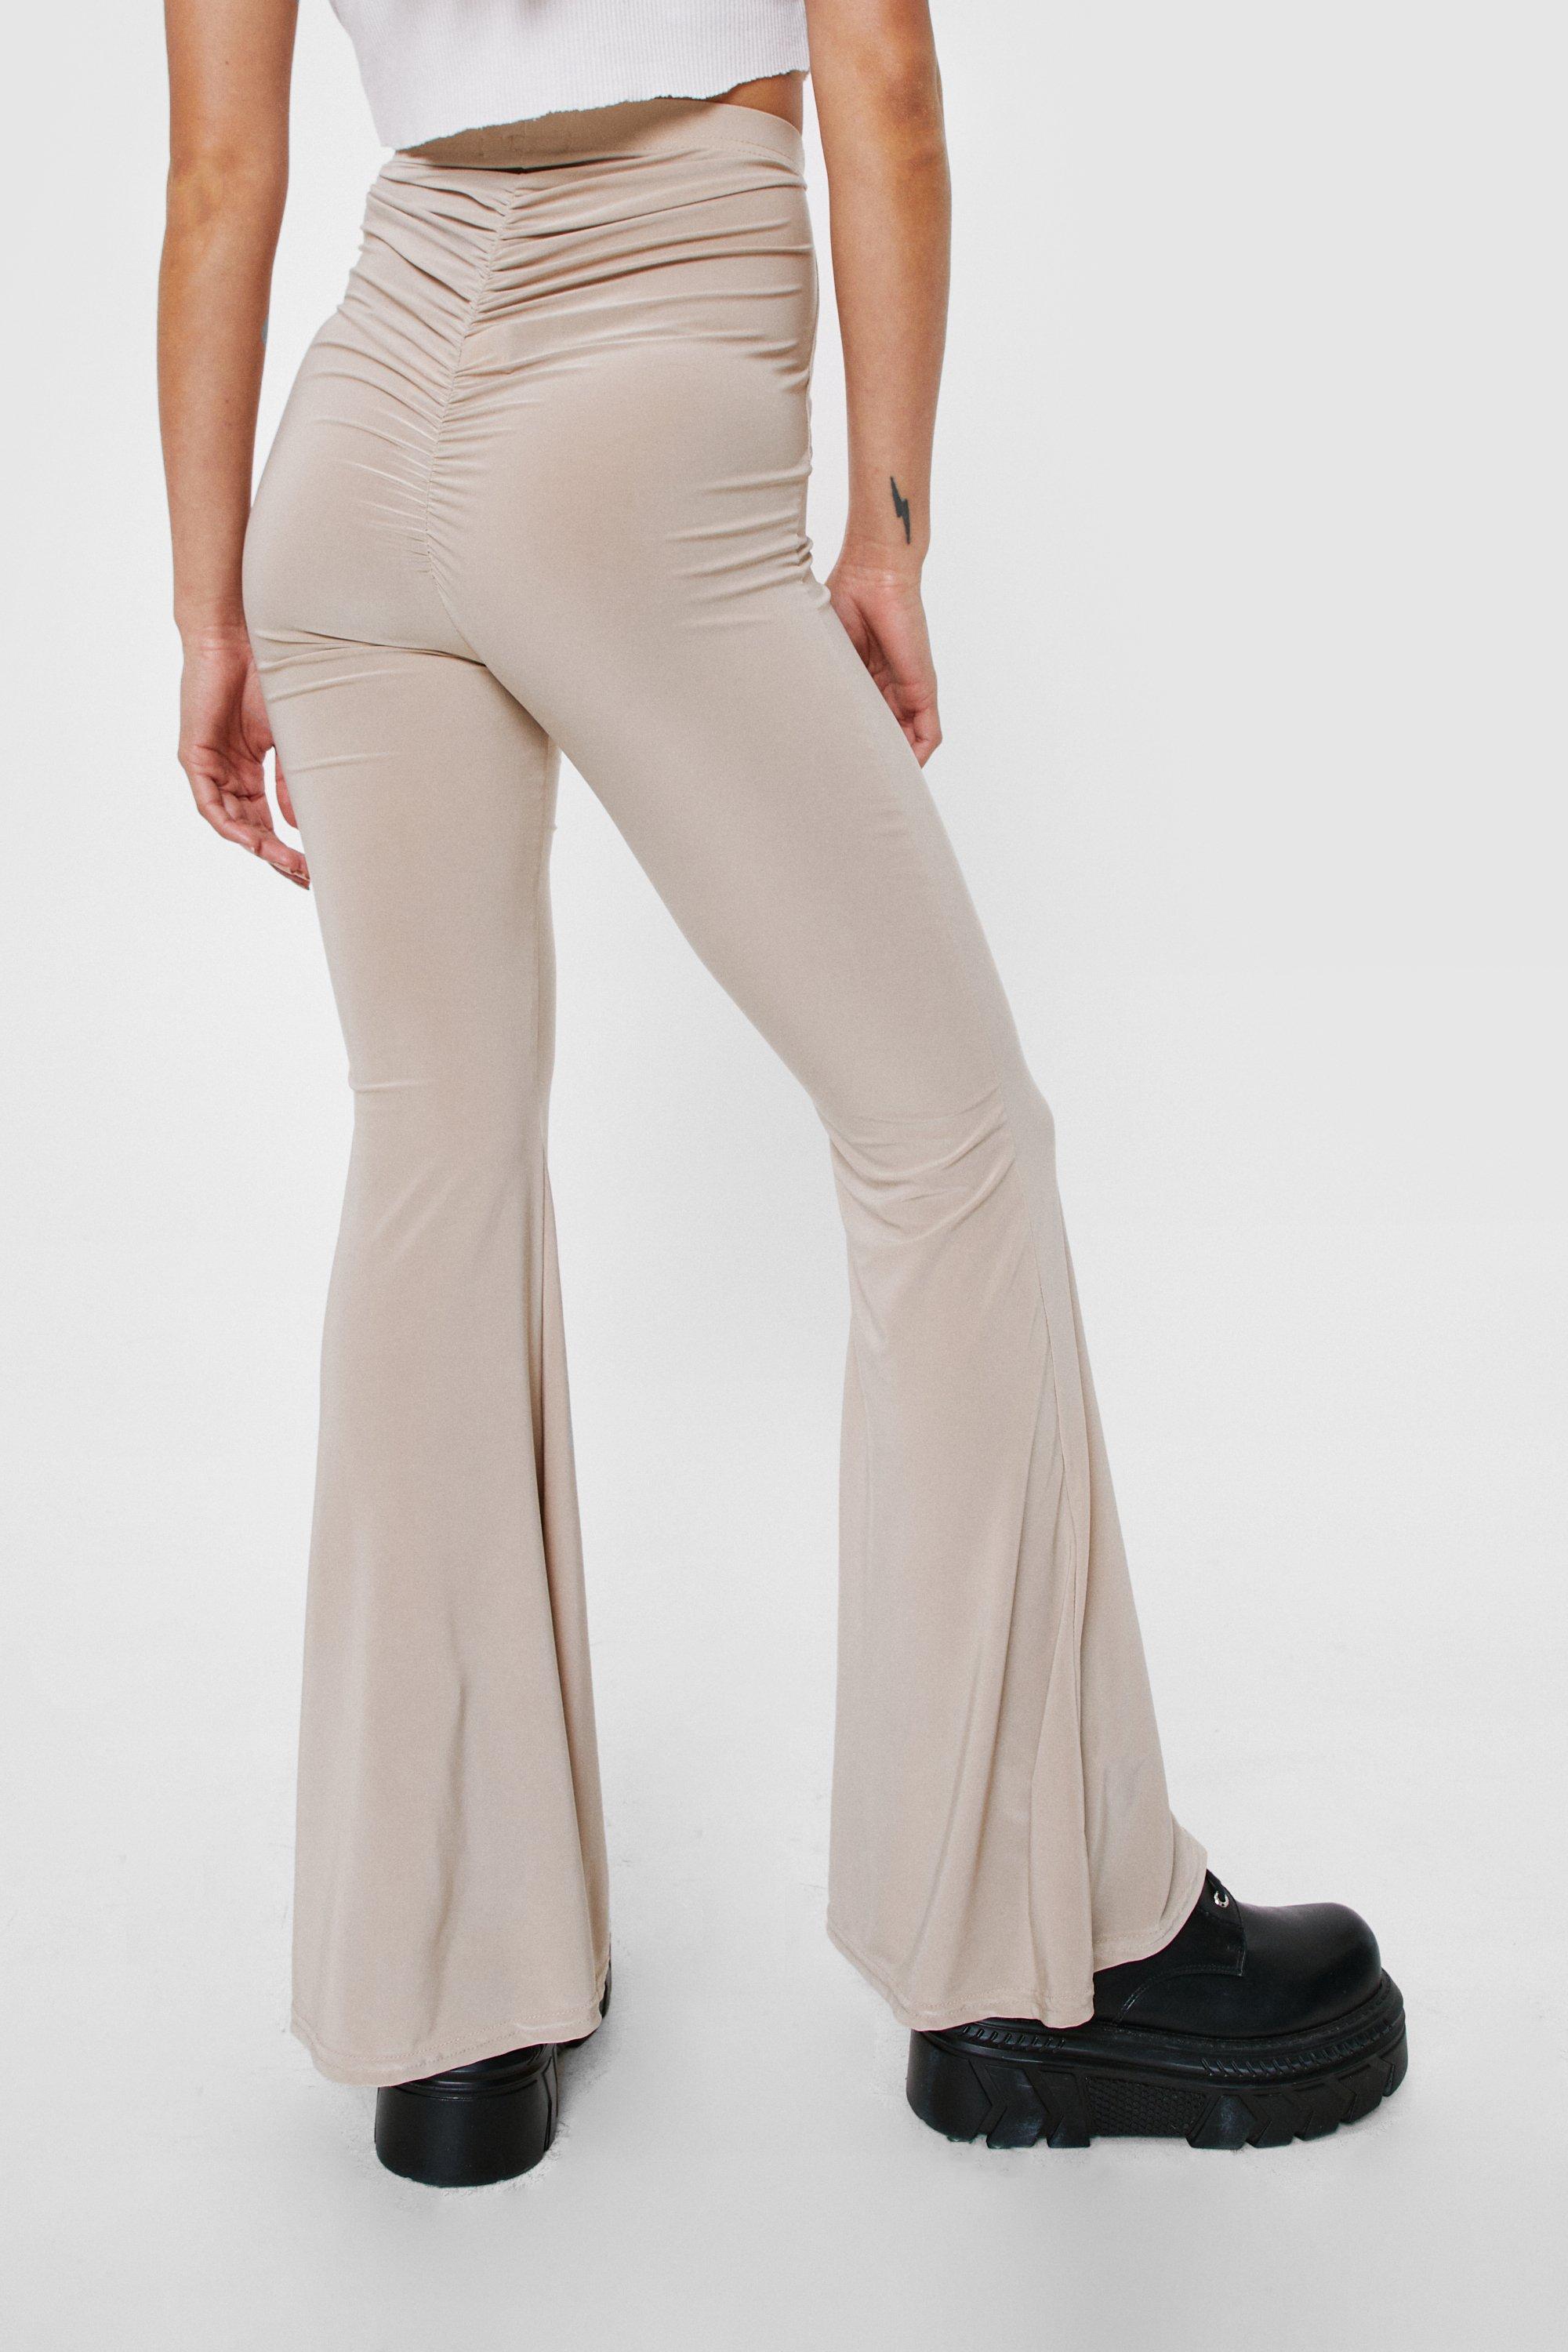 Ruched Flare Leg Trousers  Flare leg pants, Pants for women